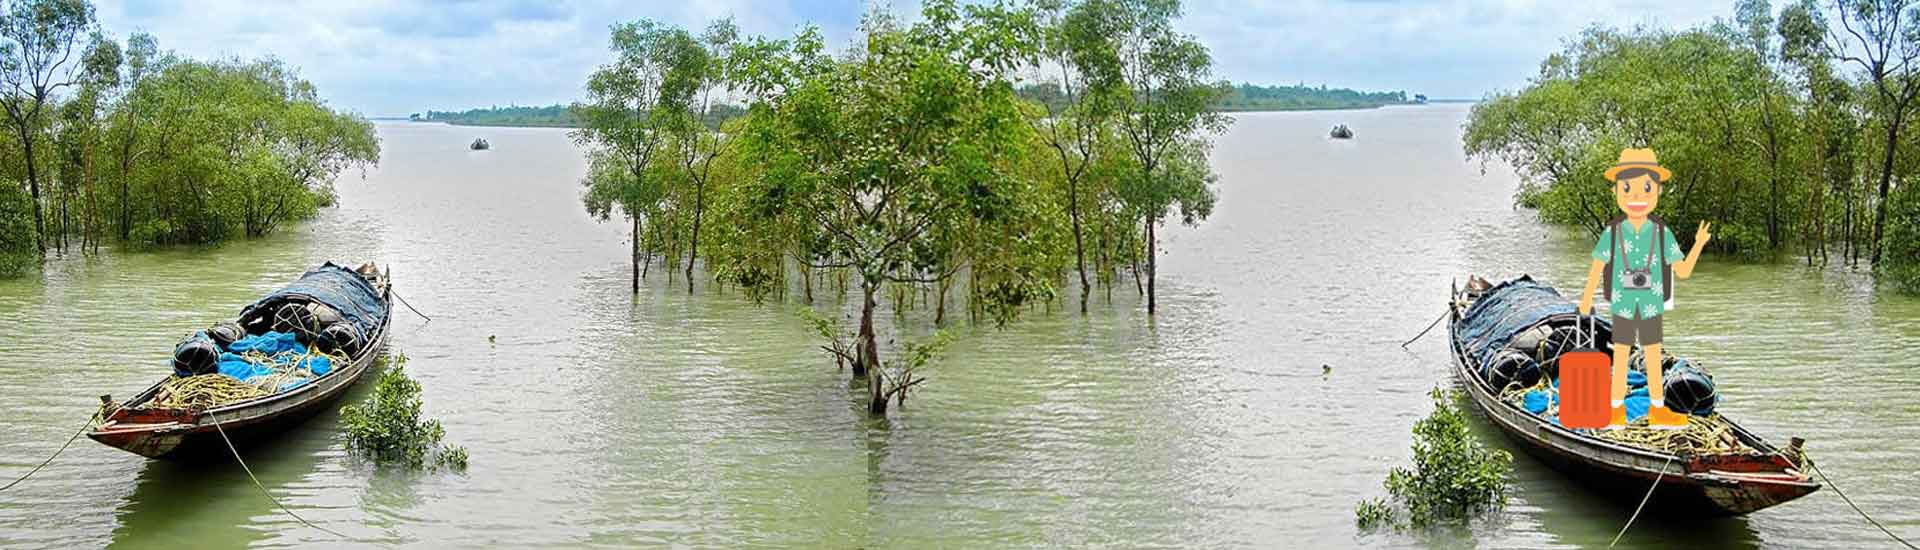 How to go for A Safe and Secure Sundarban Tour?